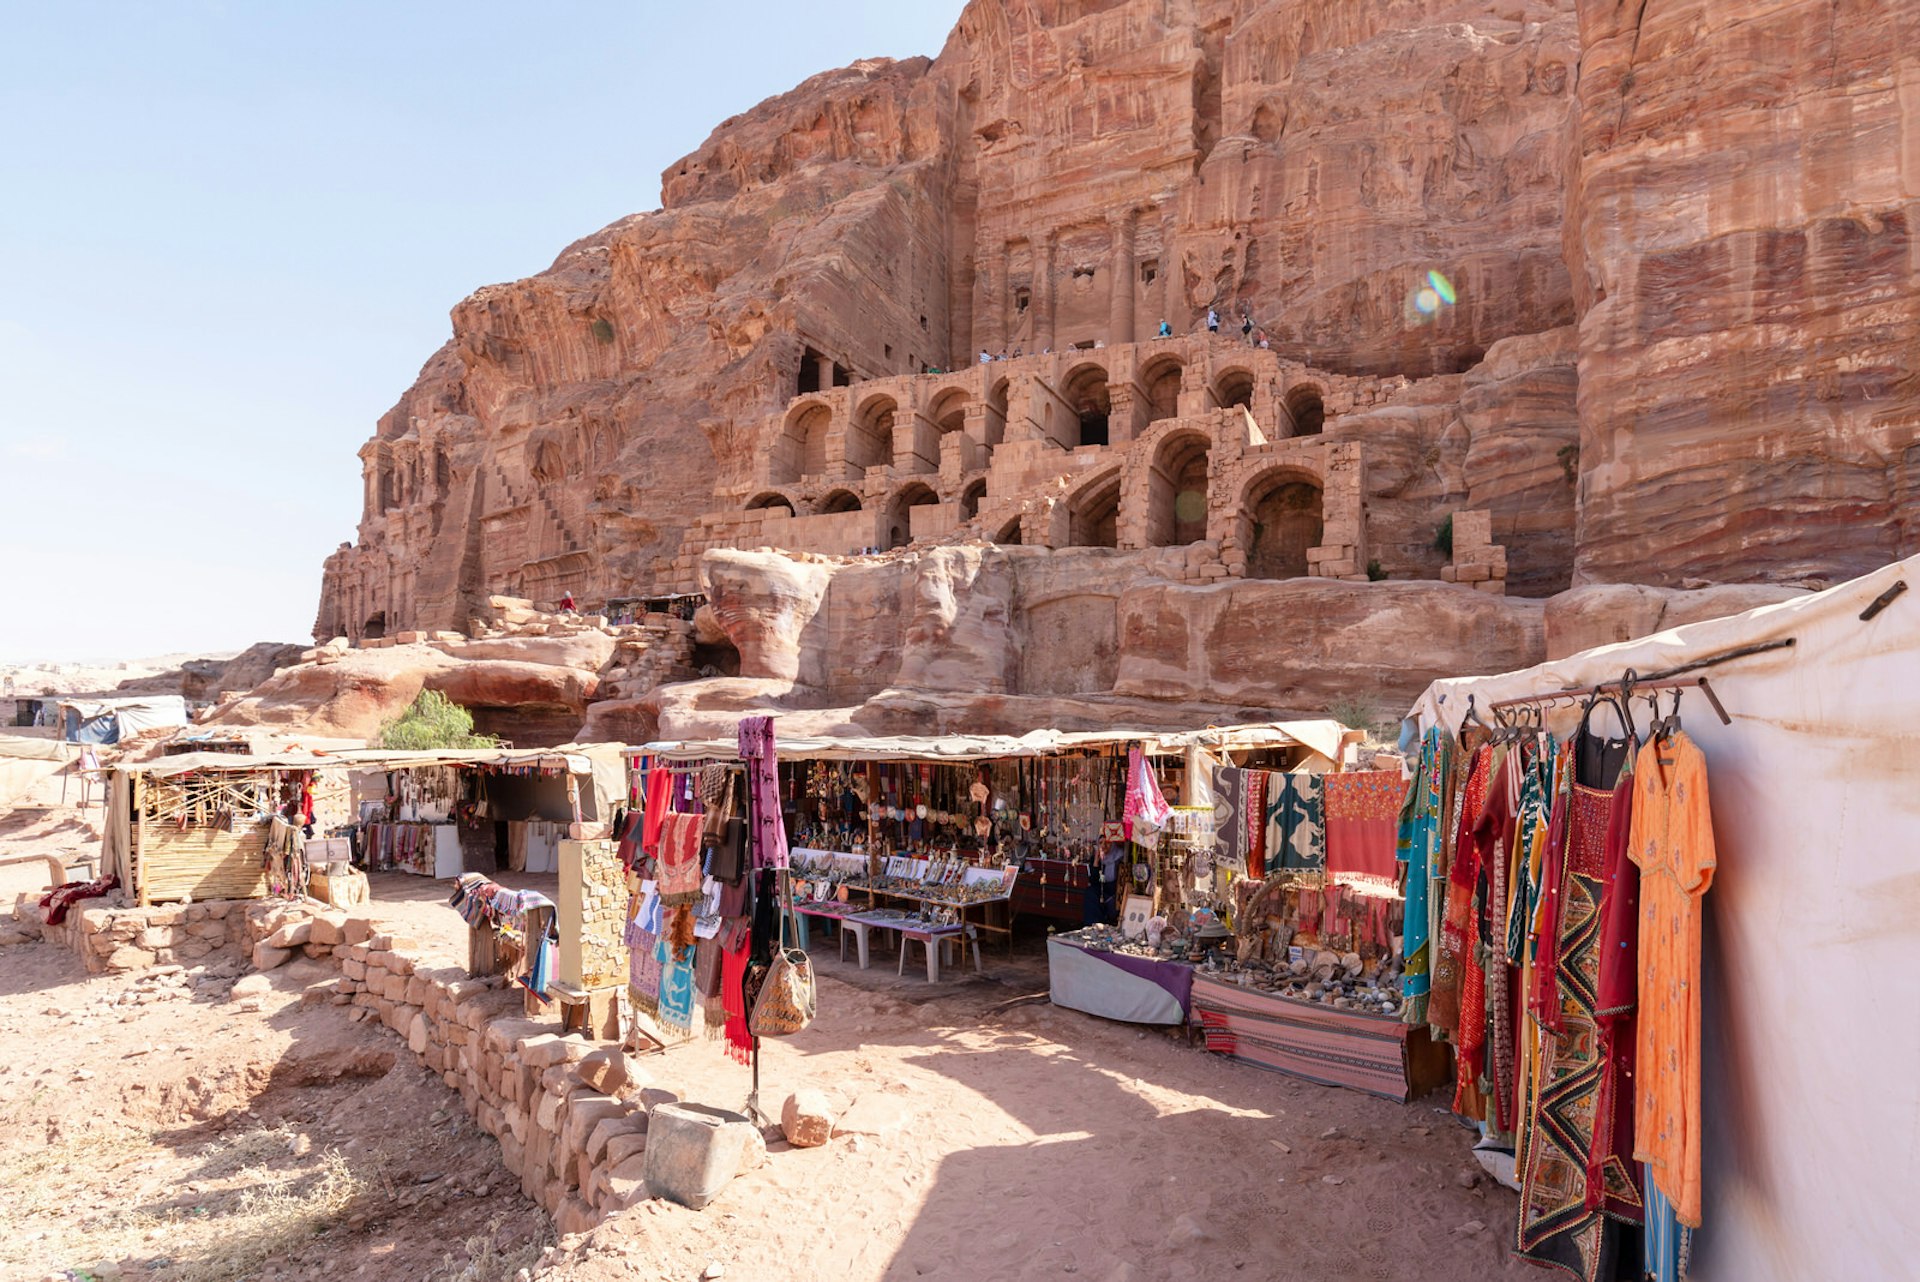 Local Bedouin operate shops in front of the Royal Tombs, Petra, Jordan